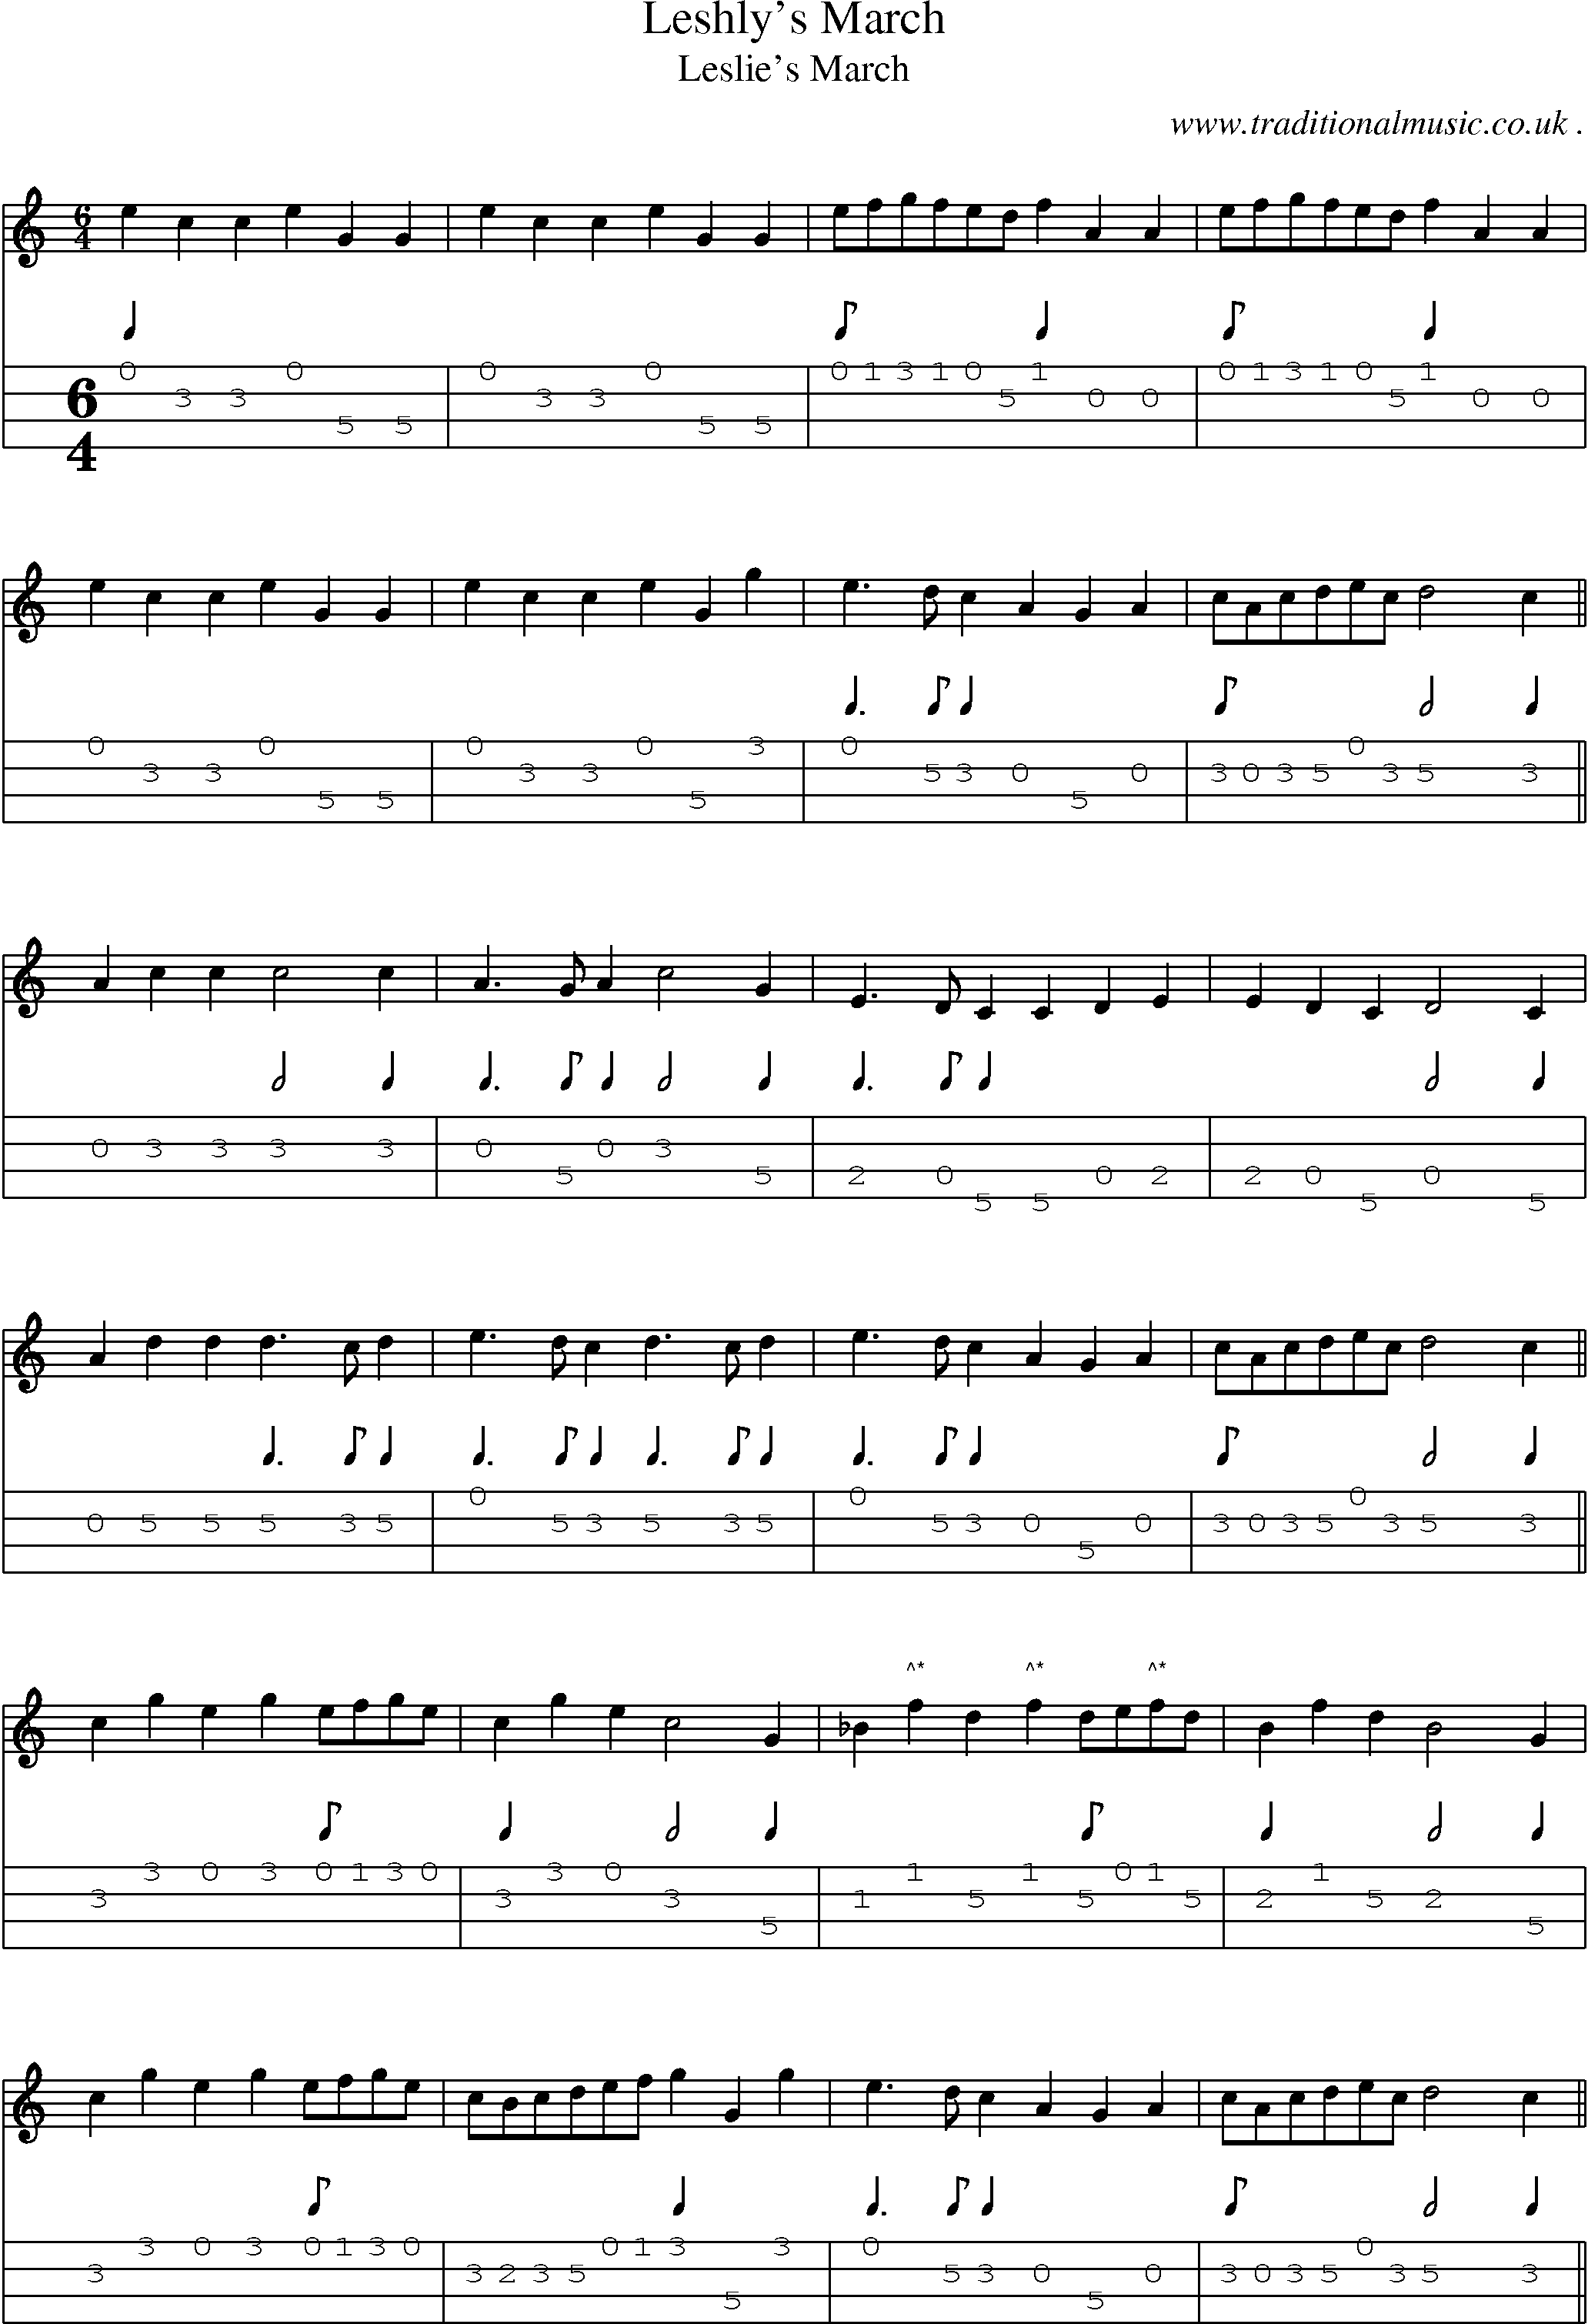 Sheet-Music and Mandolin Tabs for Leshlys March